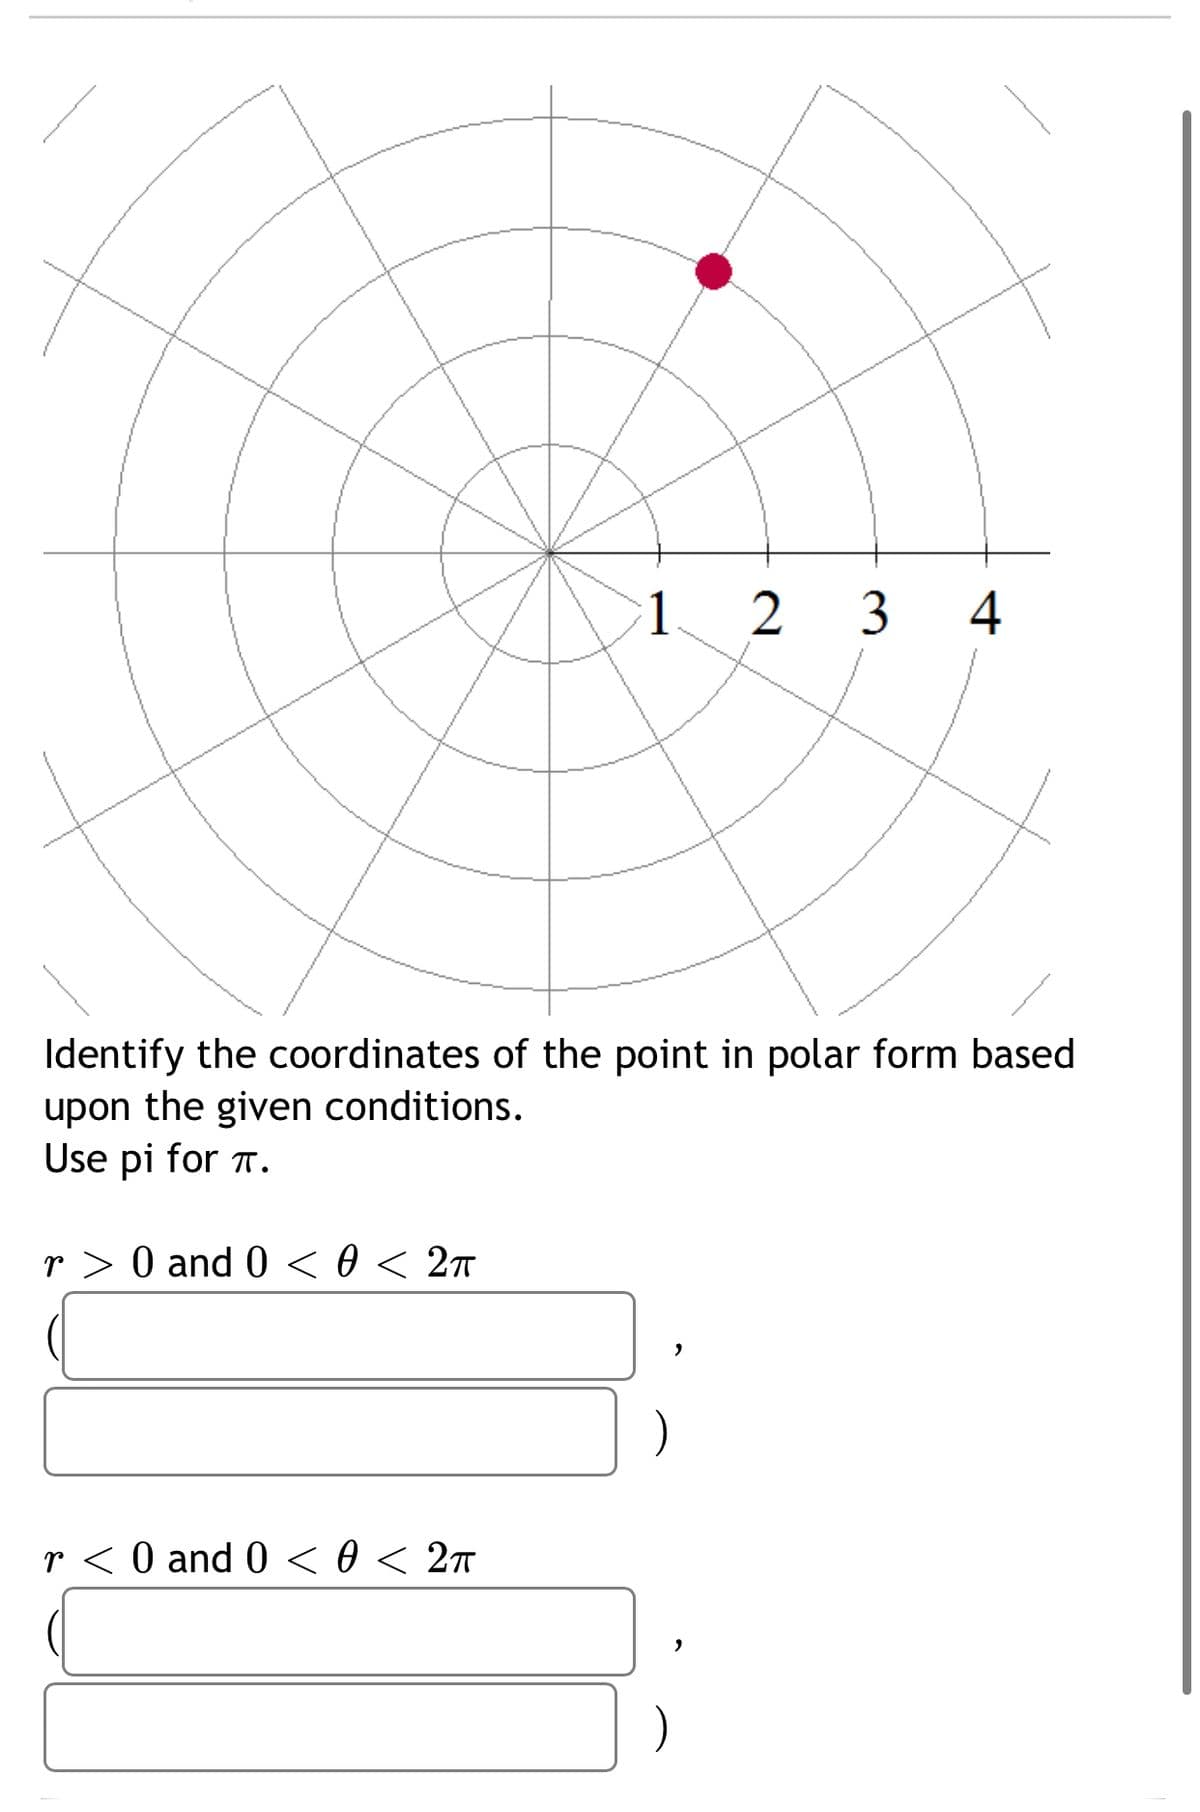 1 2 3
4
Identify the coordinates of the point in polar form based
upon the given conditions.
Use pi for T.
r > 0 and 0 < 0 < 2ñ
r < 0 and 0 <0 < 27
